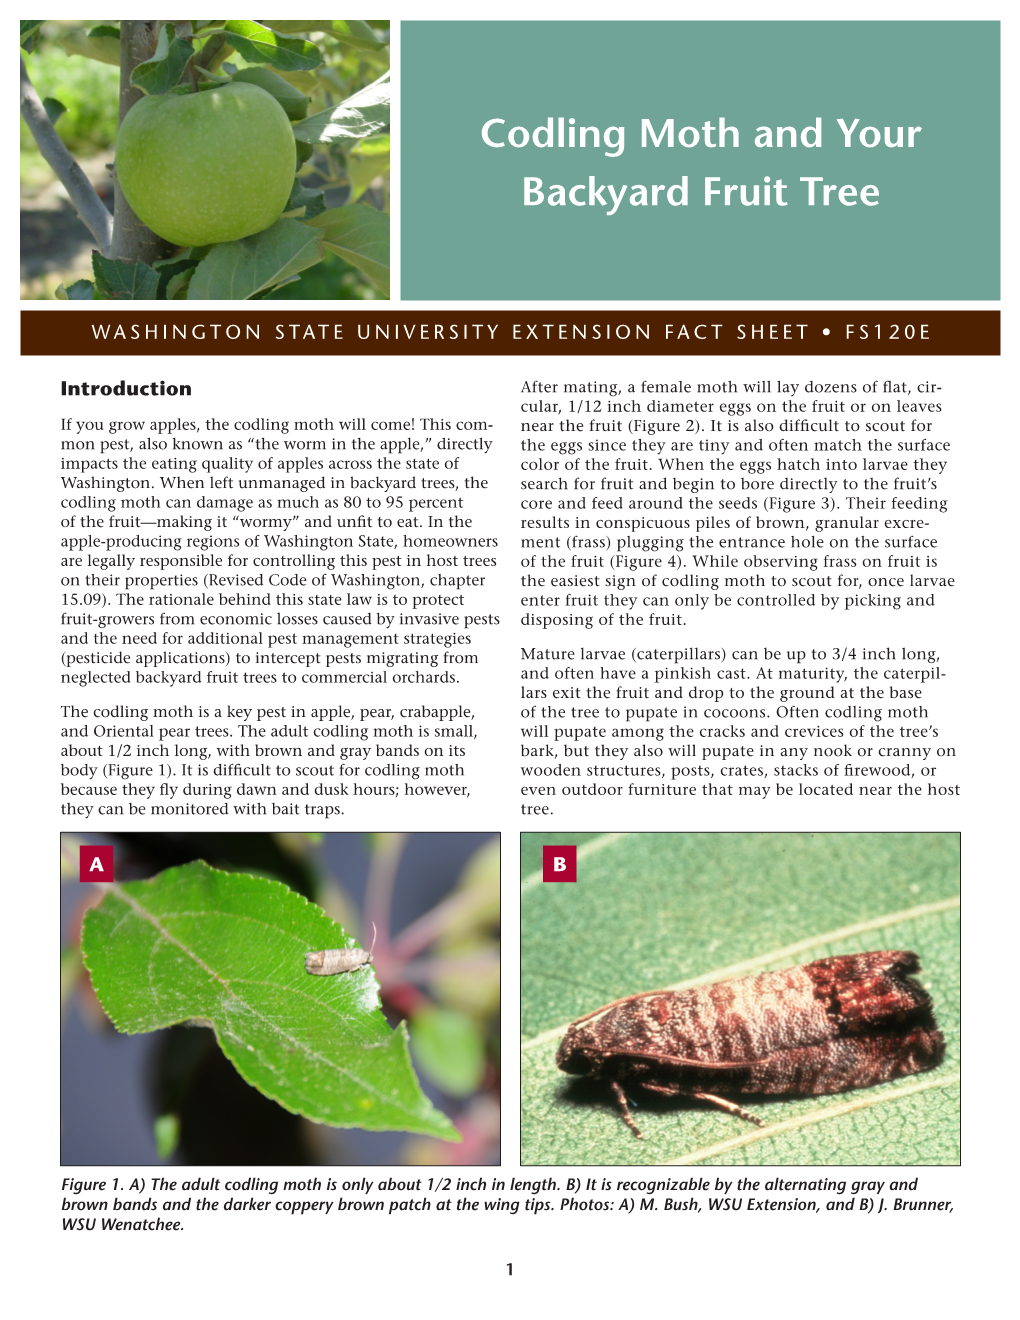 Codling Moth and Your Backyard Fruit Tree